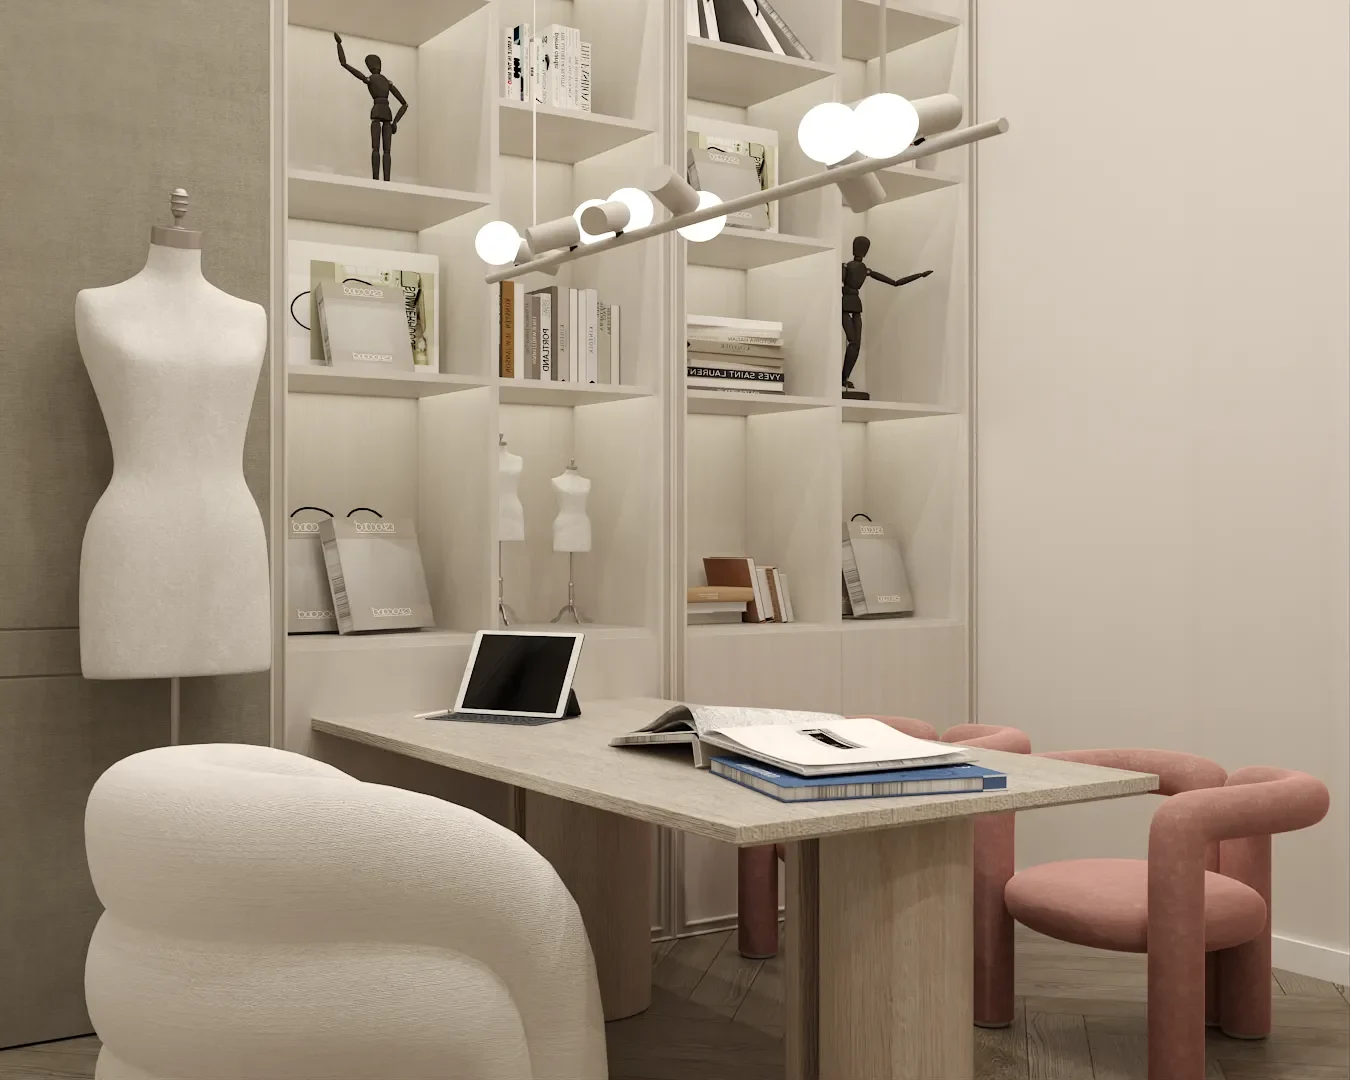 An elegant home office with a stylish desk, comfortable seating, and well-organized shelves. The decor includes a mix of modern and classic elements, with a focus on functionality and style. Design by Debora, an online interior design service.